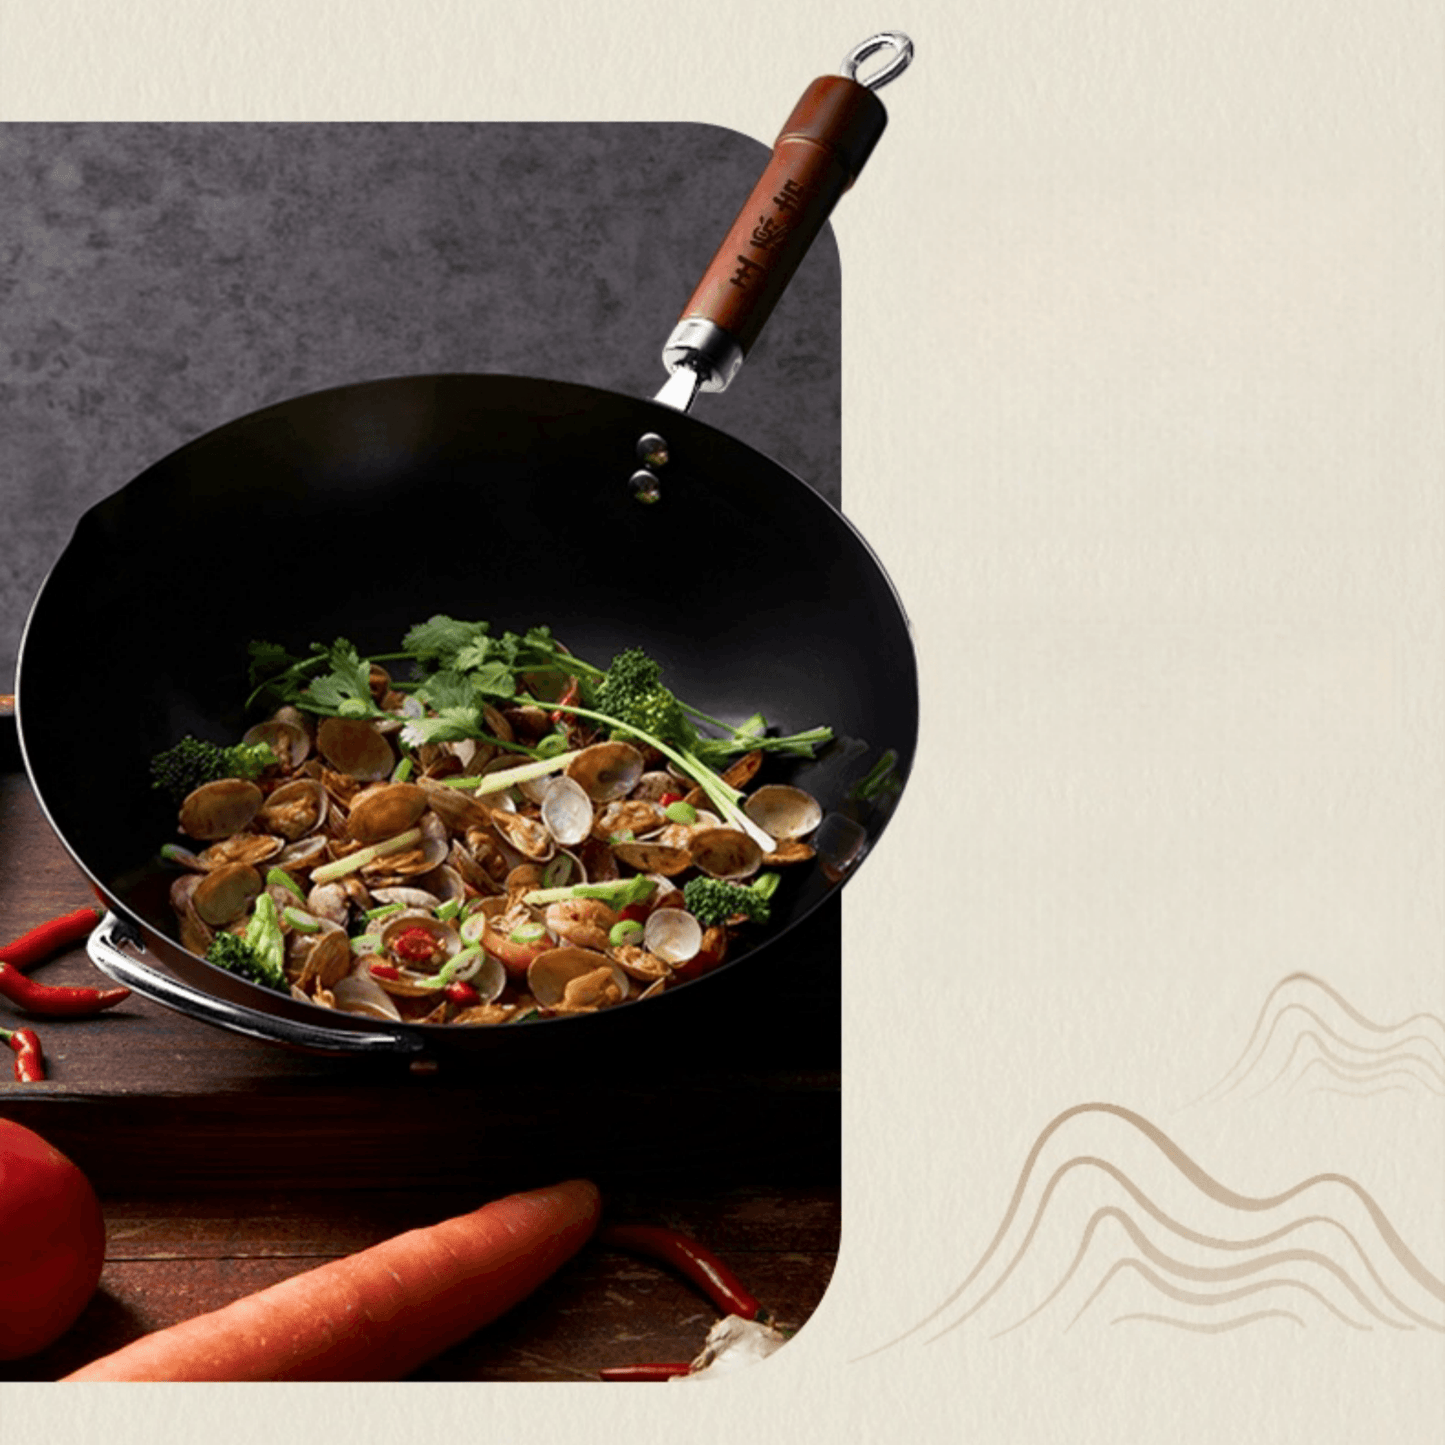 WANGYUANJI Carbon Steel Wok Pan, 11" Flat Bottom Woks and Stir Fry Pans with Lid,No Chemical Coated Traditional Wok for Induction, Electric, Gas, Halogen All Stoves-Practical Gift, 32/34/36cm